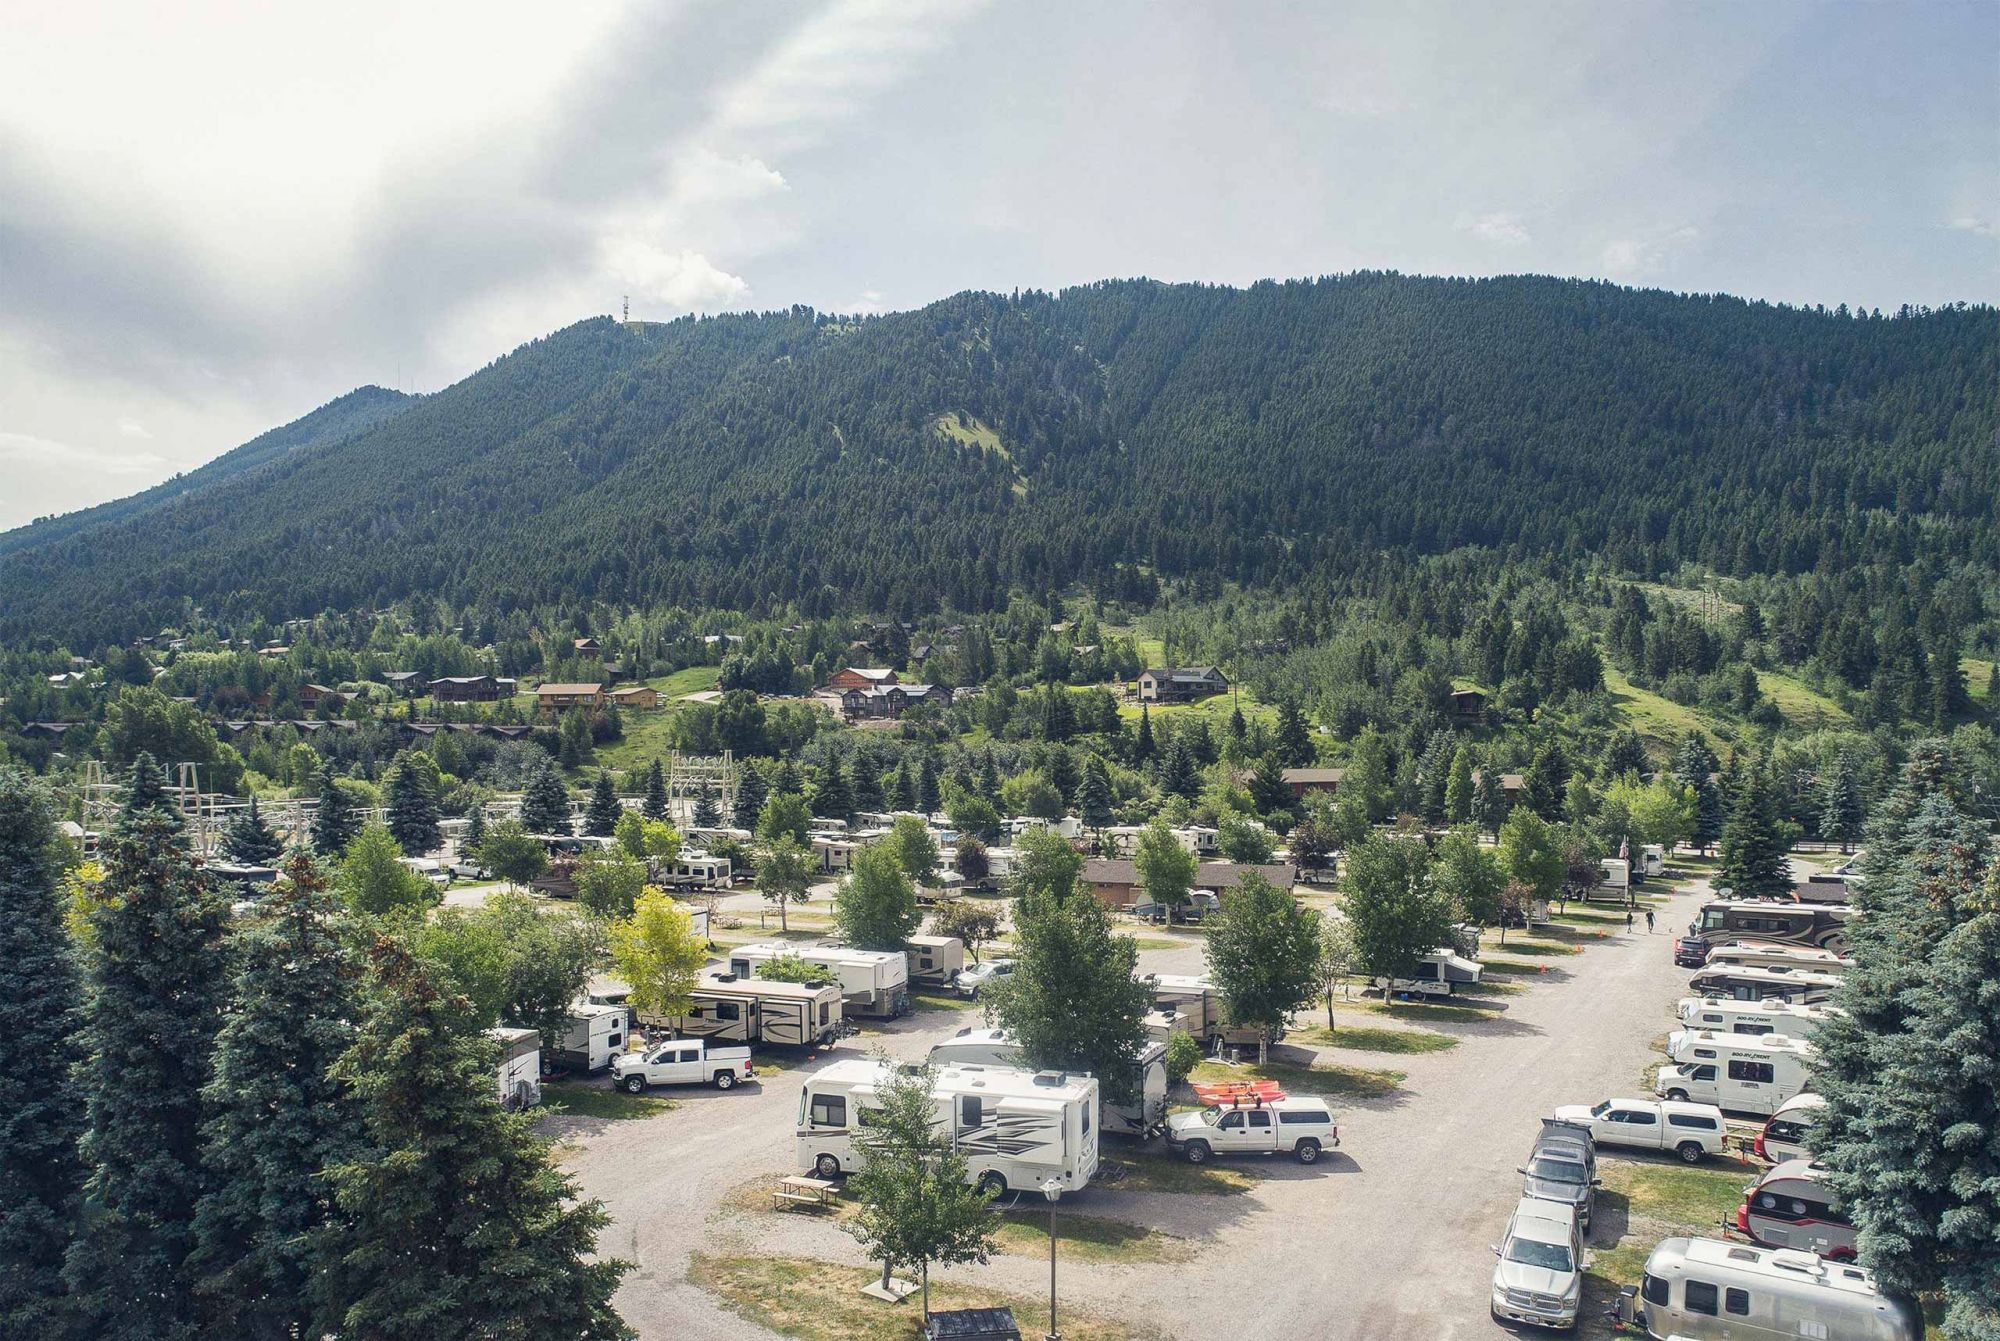 The image shows a campground with numerous RVs situated among trees, set against a backdrop of forested mountains.